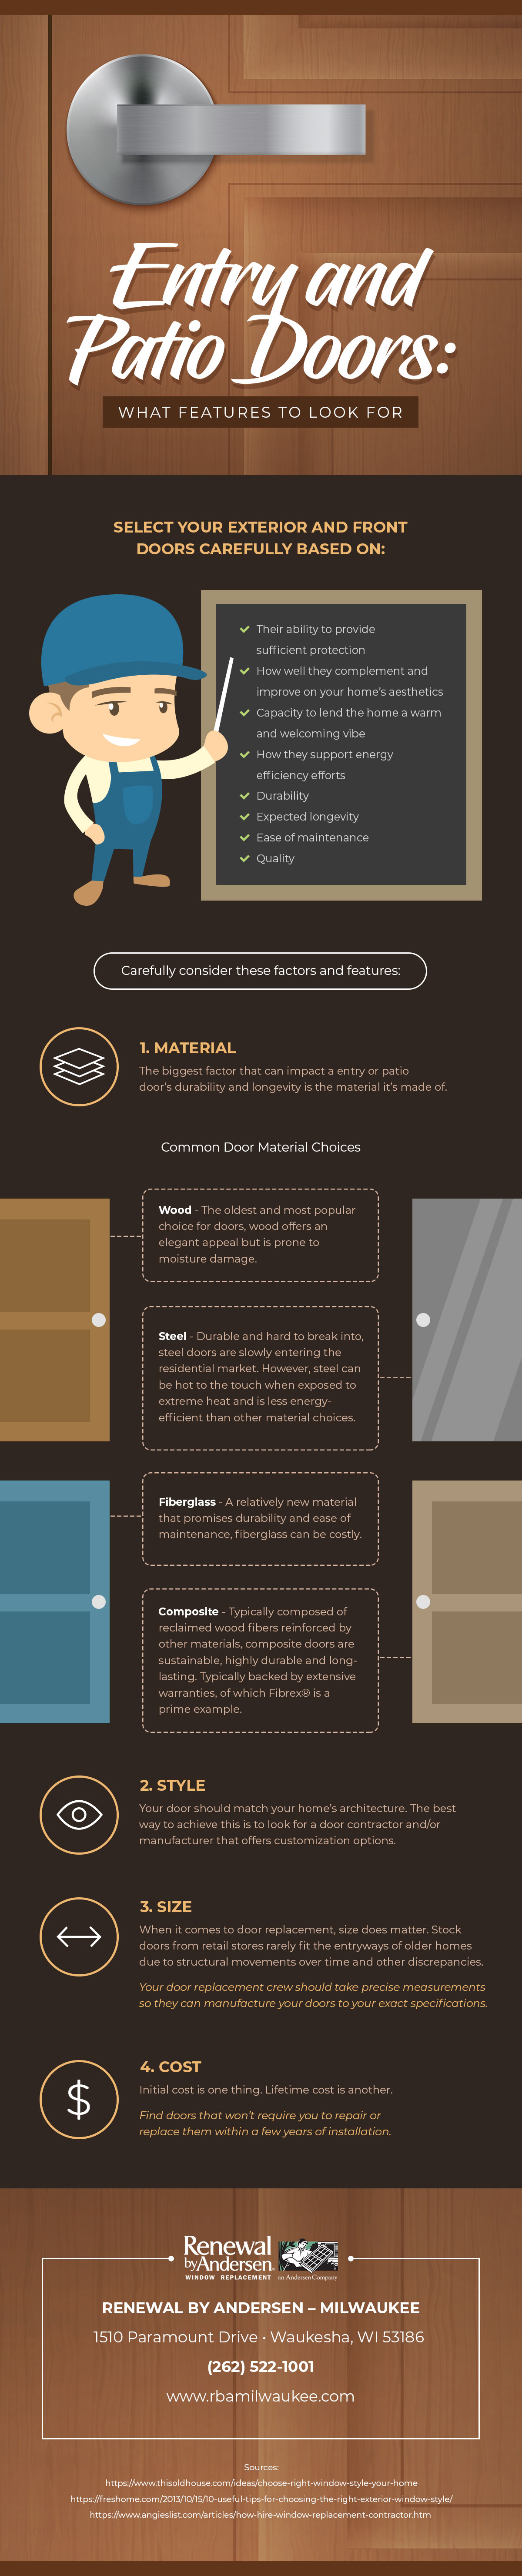 Infographic: Entry and Patio Doors What Features to Look For